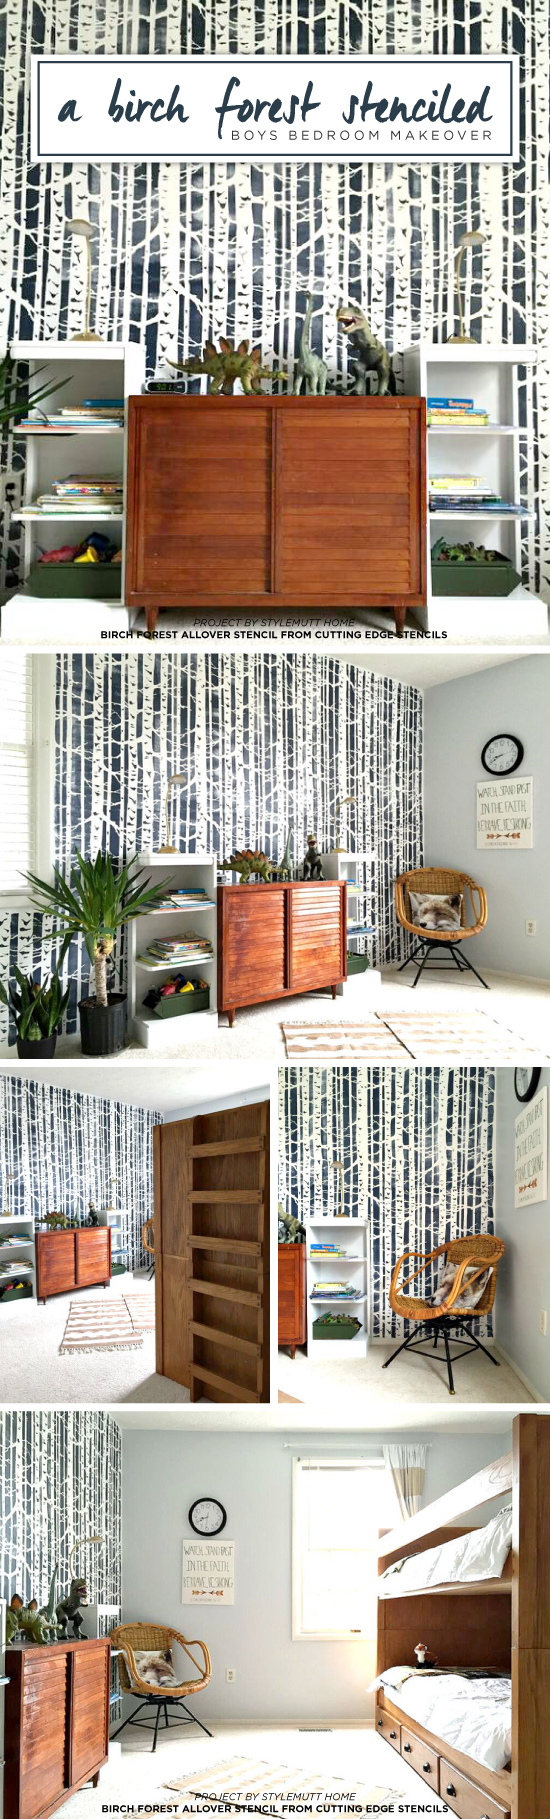 Cutting Edge Stencils shares a DIY stenciled boys bedroom accent wall using the Birch Forest Allover Stencil in navy and white. http://www.cuttingedgestencils.com/allover-stencil-birch-forest.html